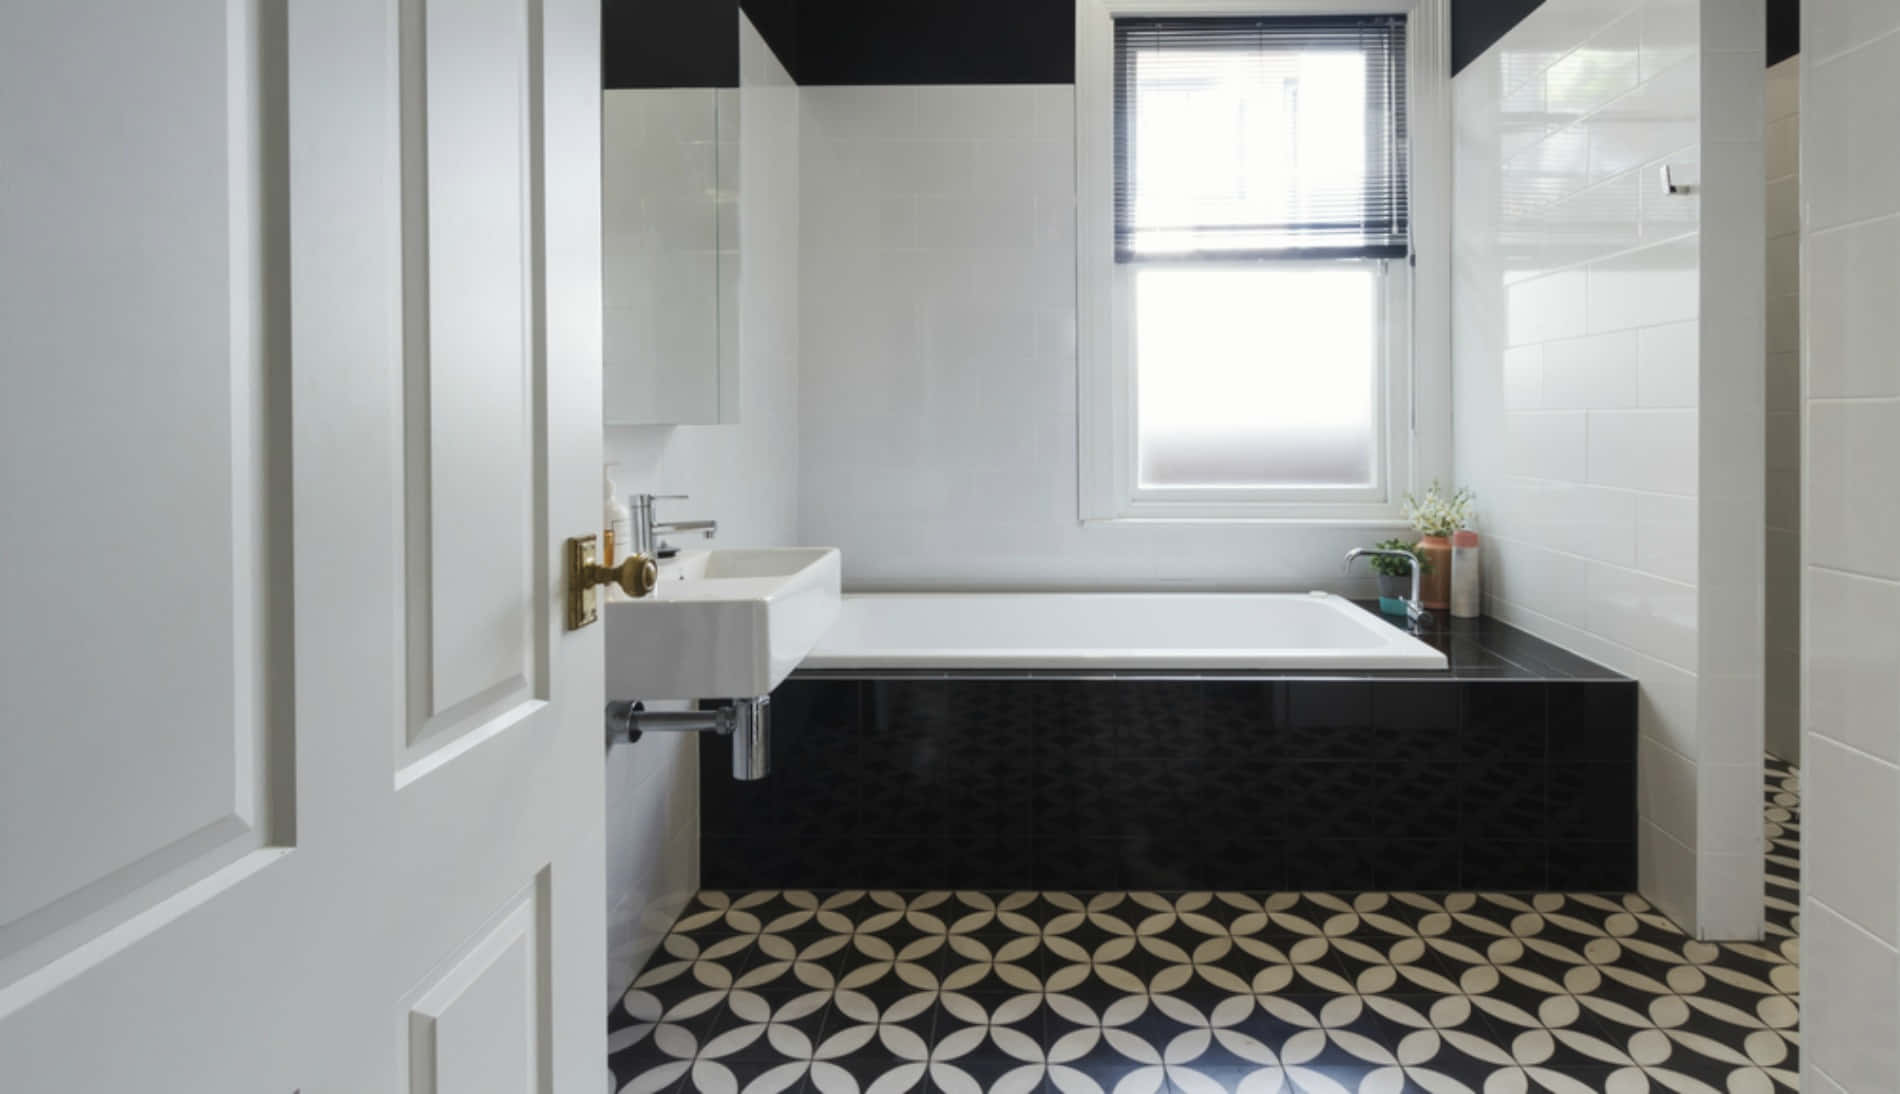 A Bathroom With Black And White Tiled Floors